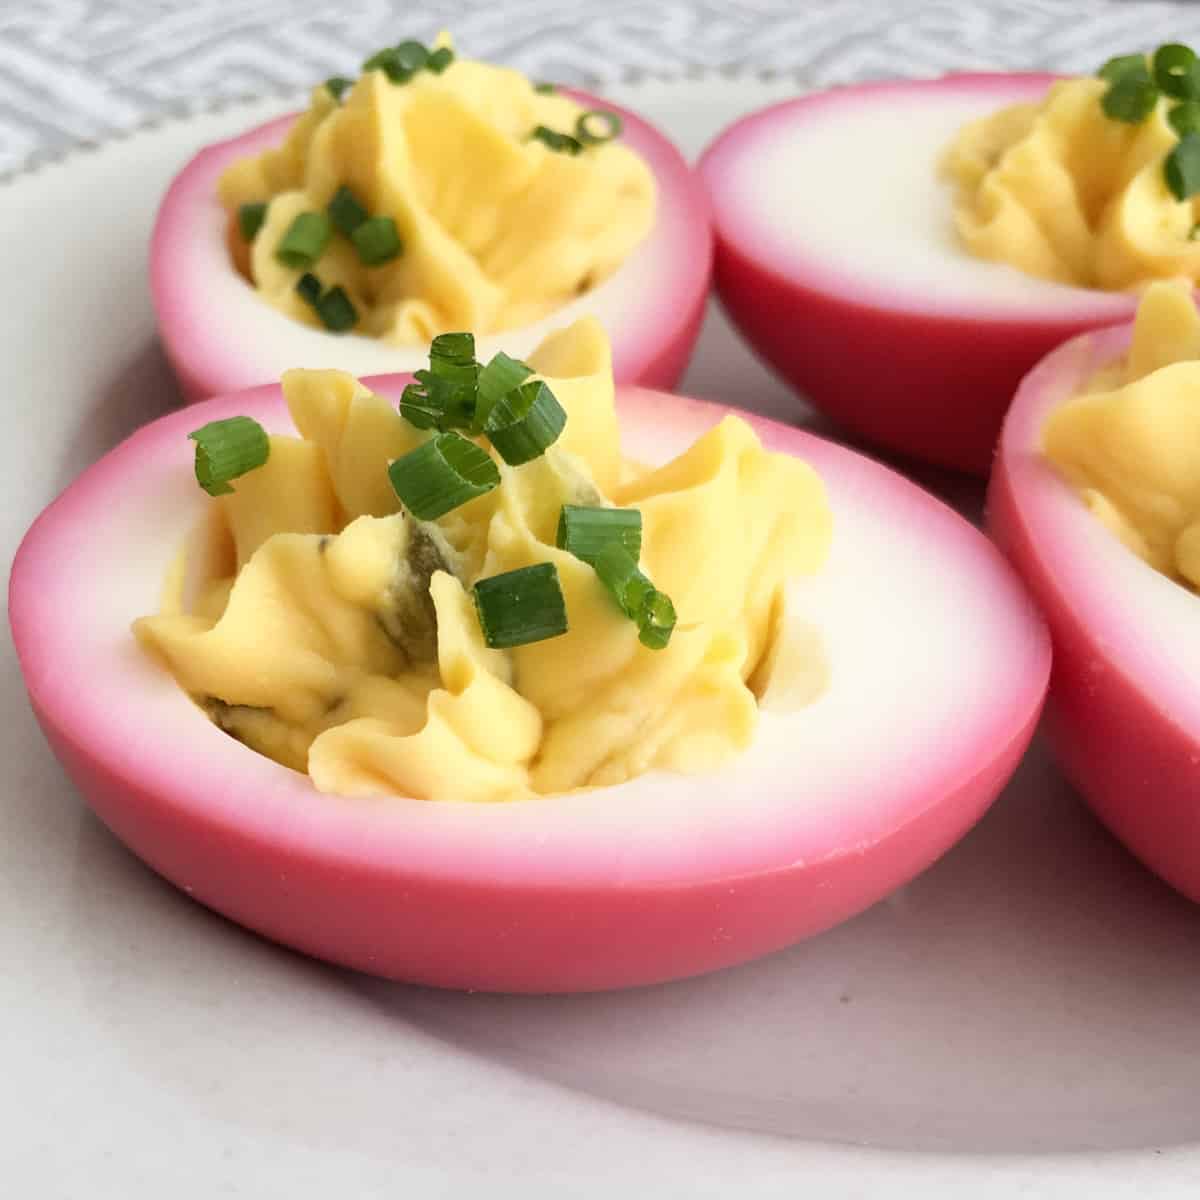 Pink tinted eggs filled with deviled yolks and sprinkled with chopped fresh green chives.